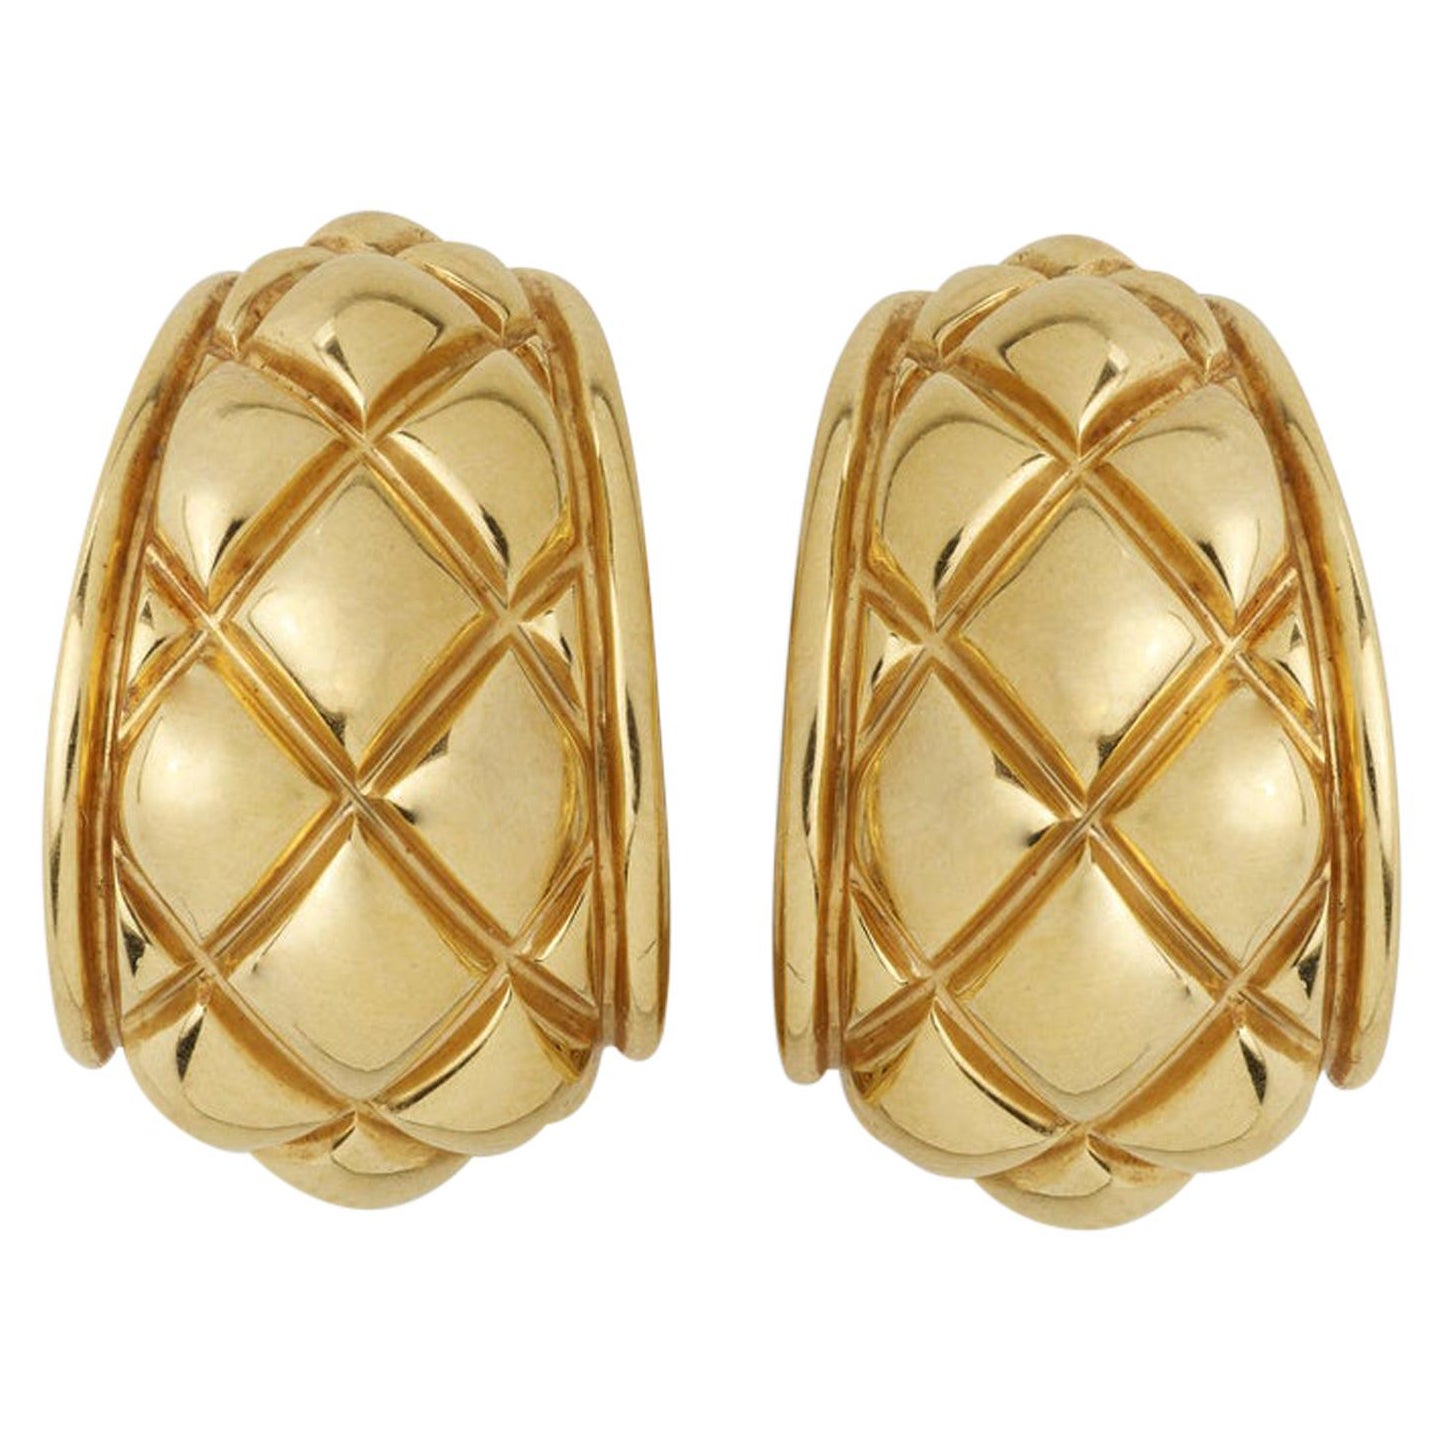 Chaumet Quilted Half-Hoop Earrings Omega Backs and Post 18K Yellow Gold